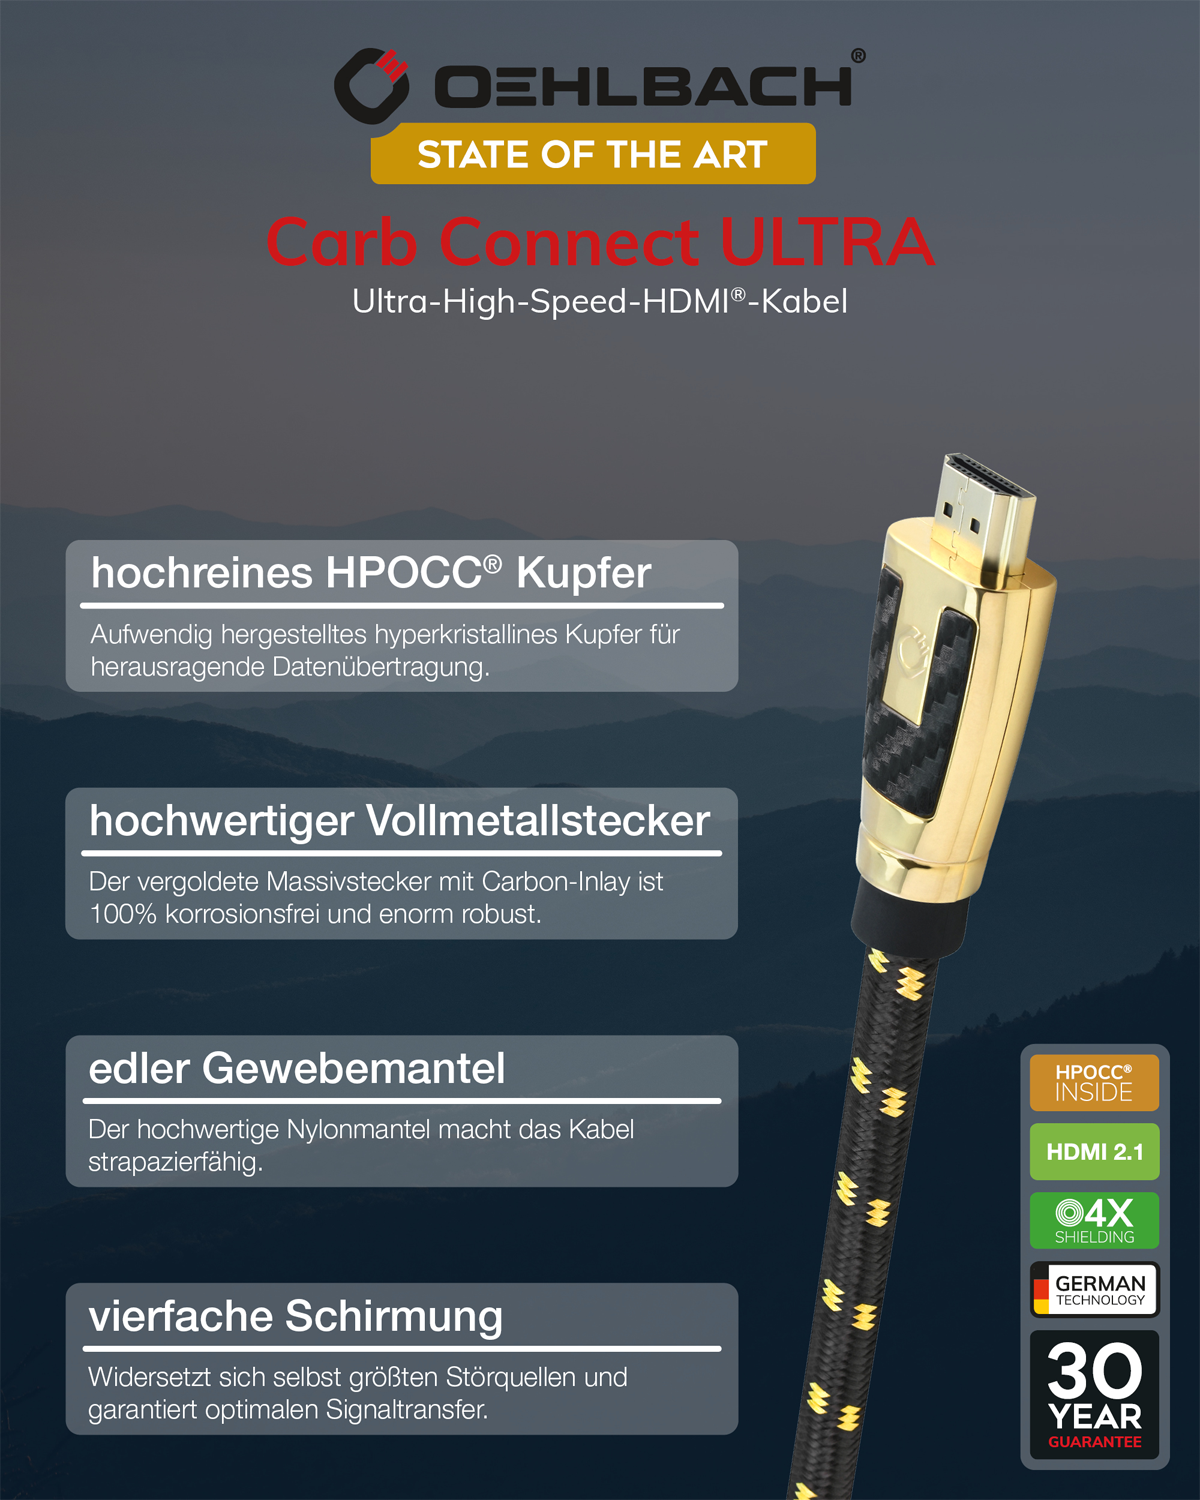 OEHLBACH Carb Connect End Ultra High 8K Kabel HDMI